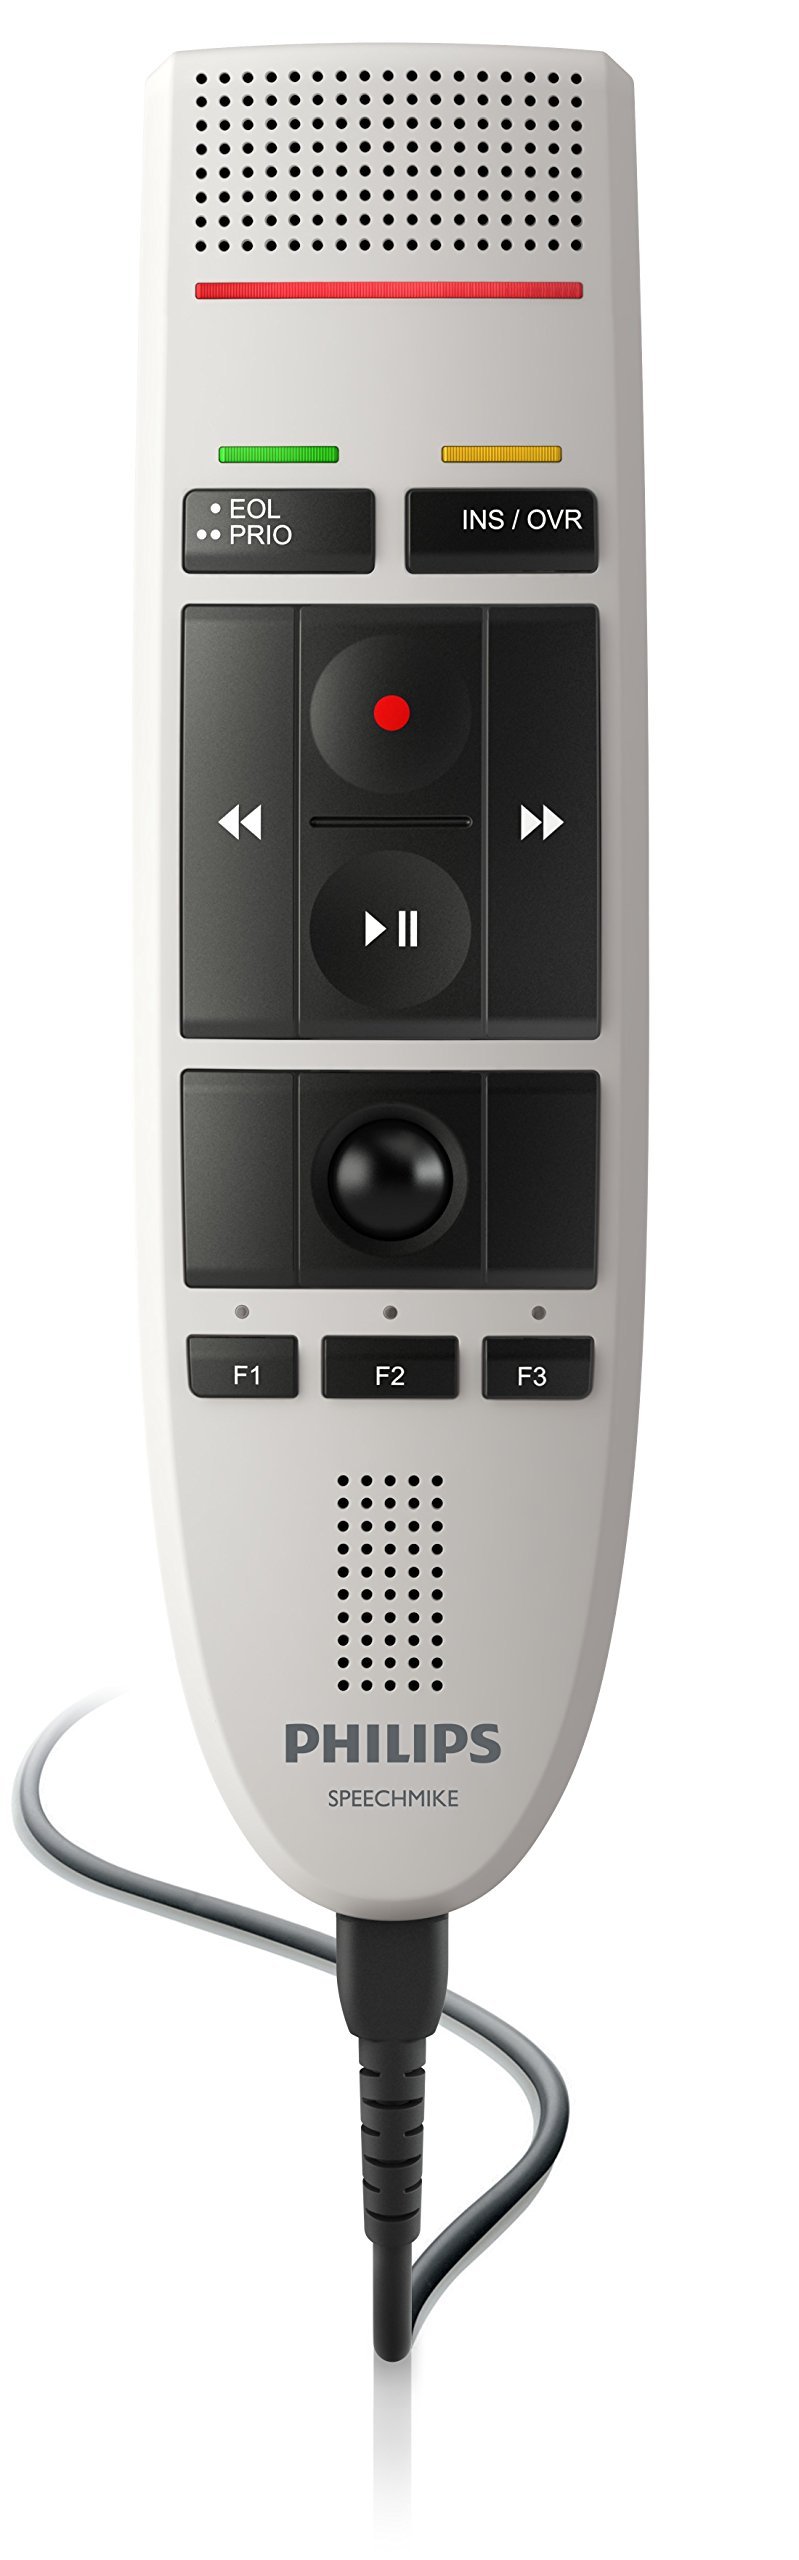 Philips LFH3200 SpeechMike III Pro (Push Button Operation) USB Professional PC-Dictation Microphone